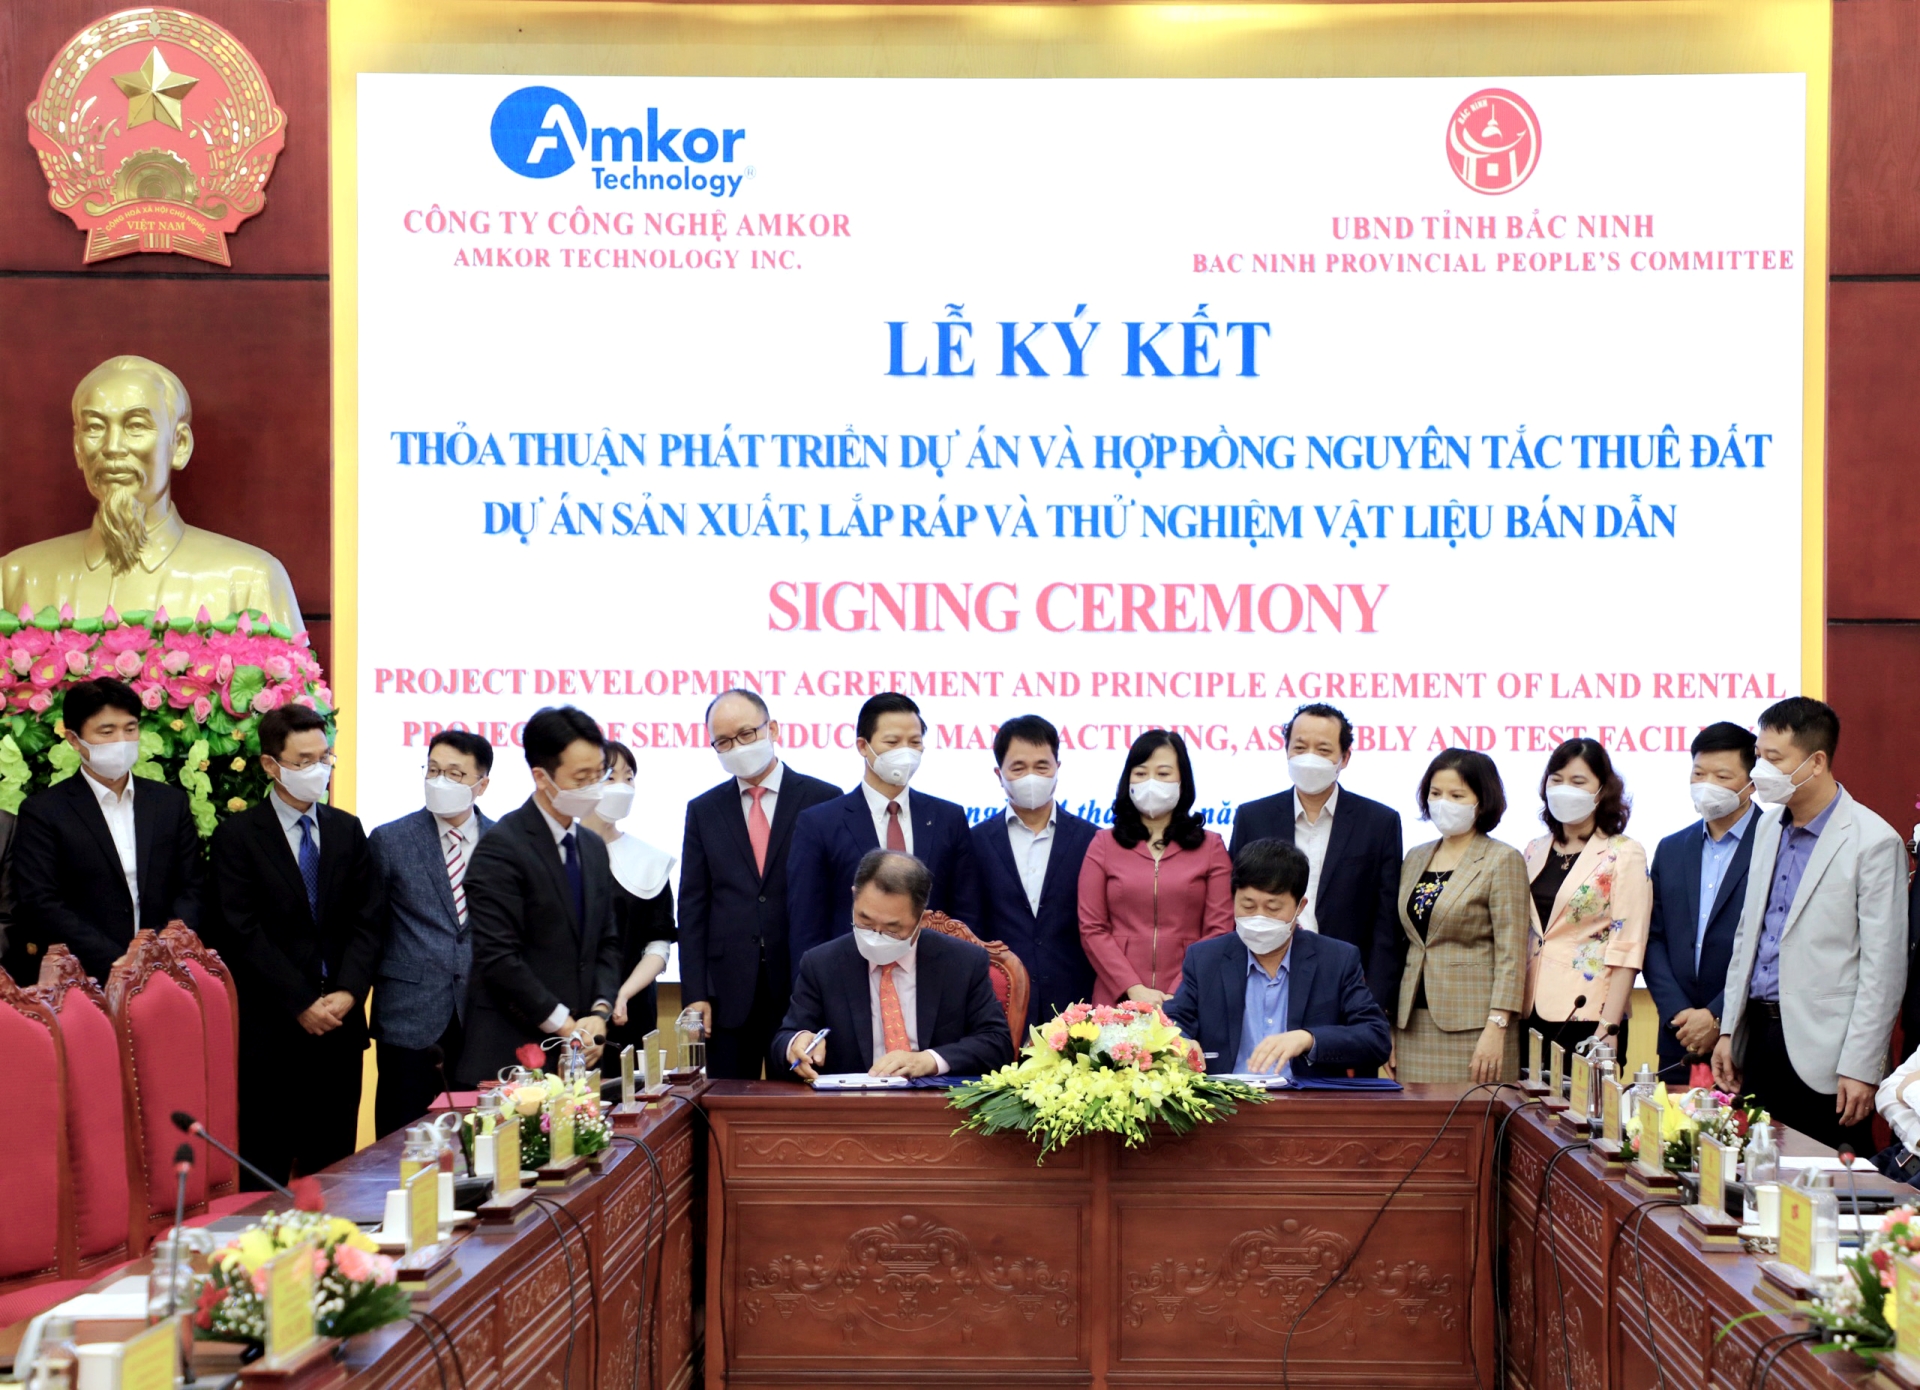 The world's leading group in semiconductor manufacturing - Amkor Technology decided to set up a factory in Yen Phong II-C Industrial Park, Bac Ninh.